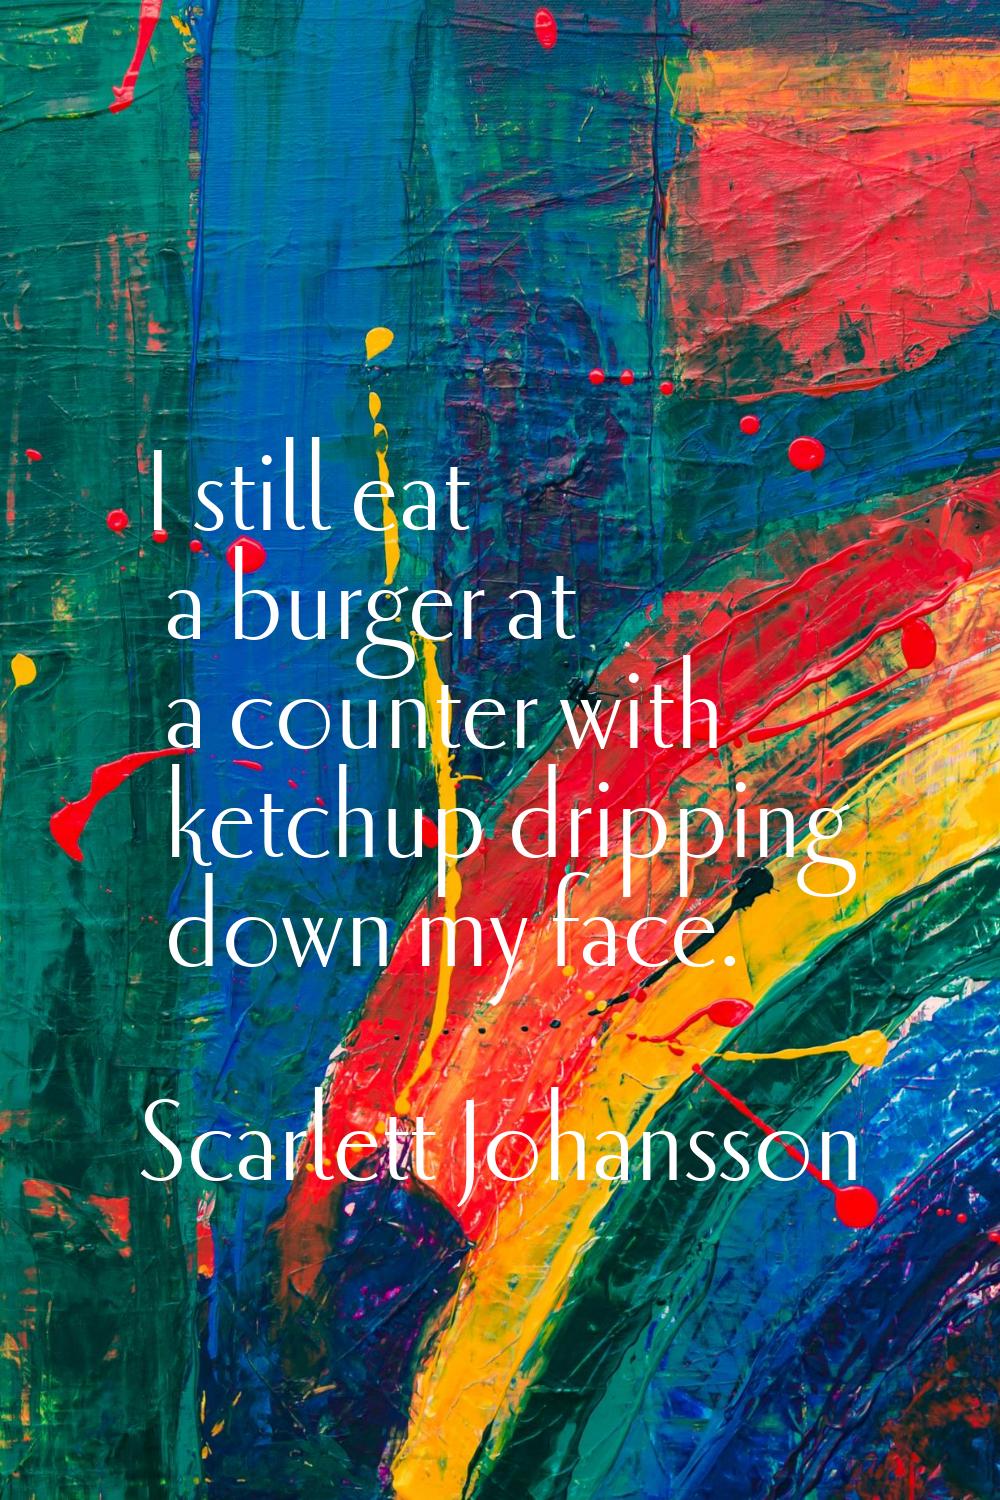 I still eat a burger at a counter with ketchup dripping down my face.